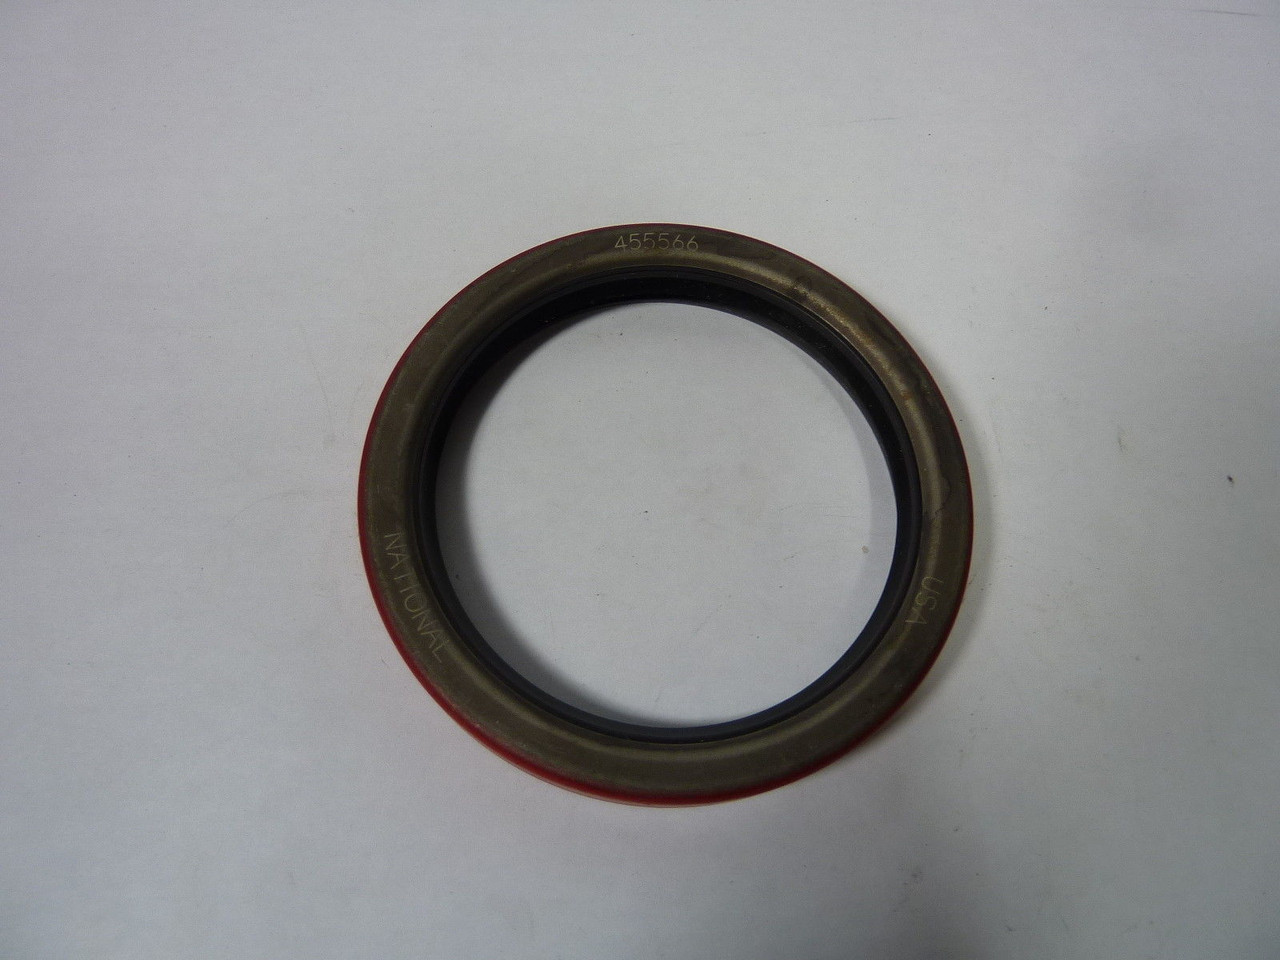 National Oil Seals 455566 Oil Seal 3.25 x 4.13 x 0.5625 in ! NEW !